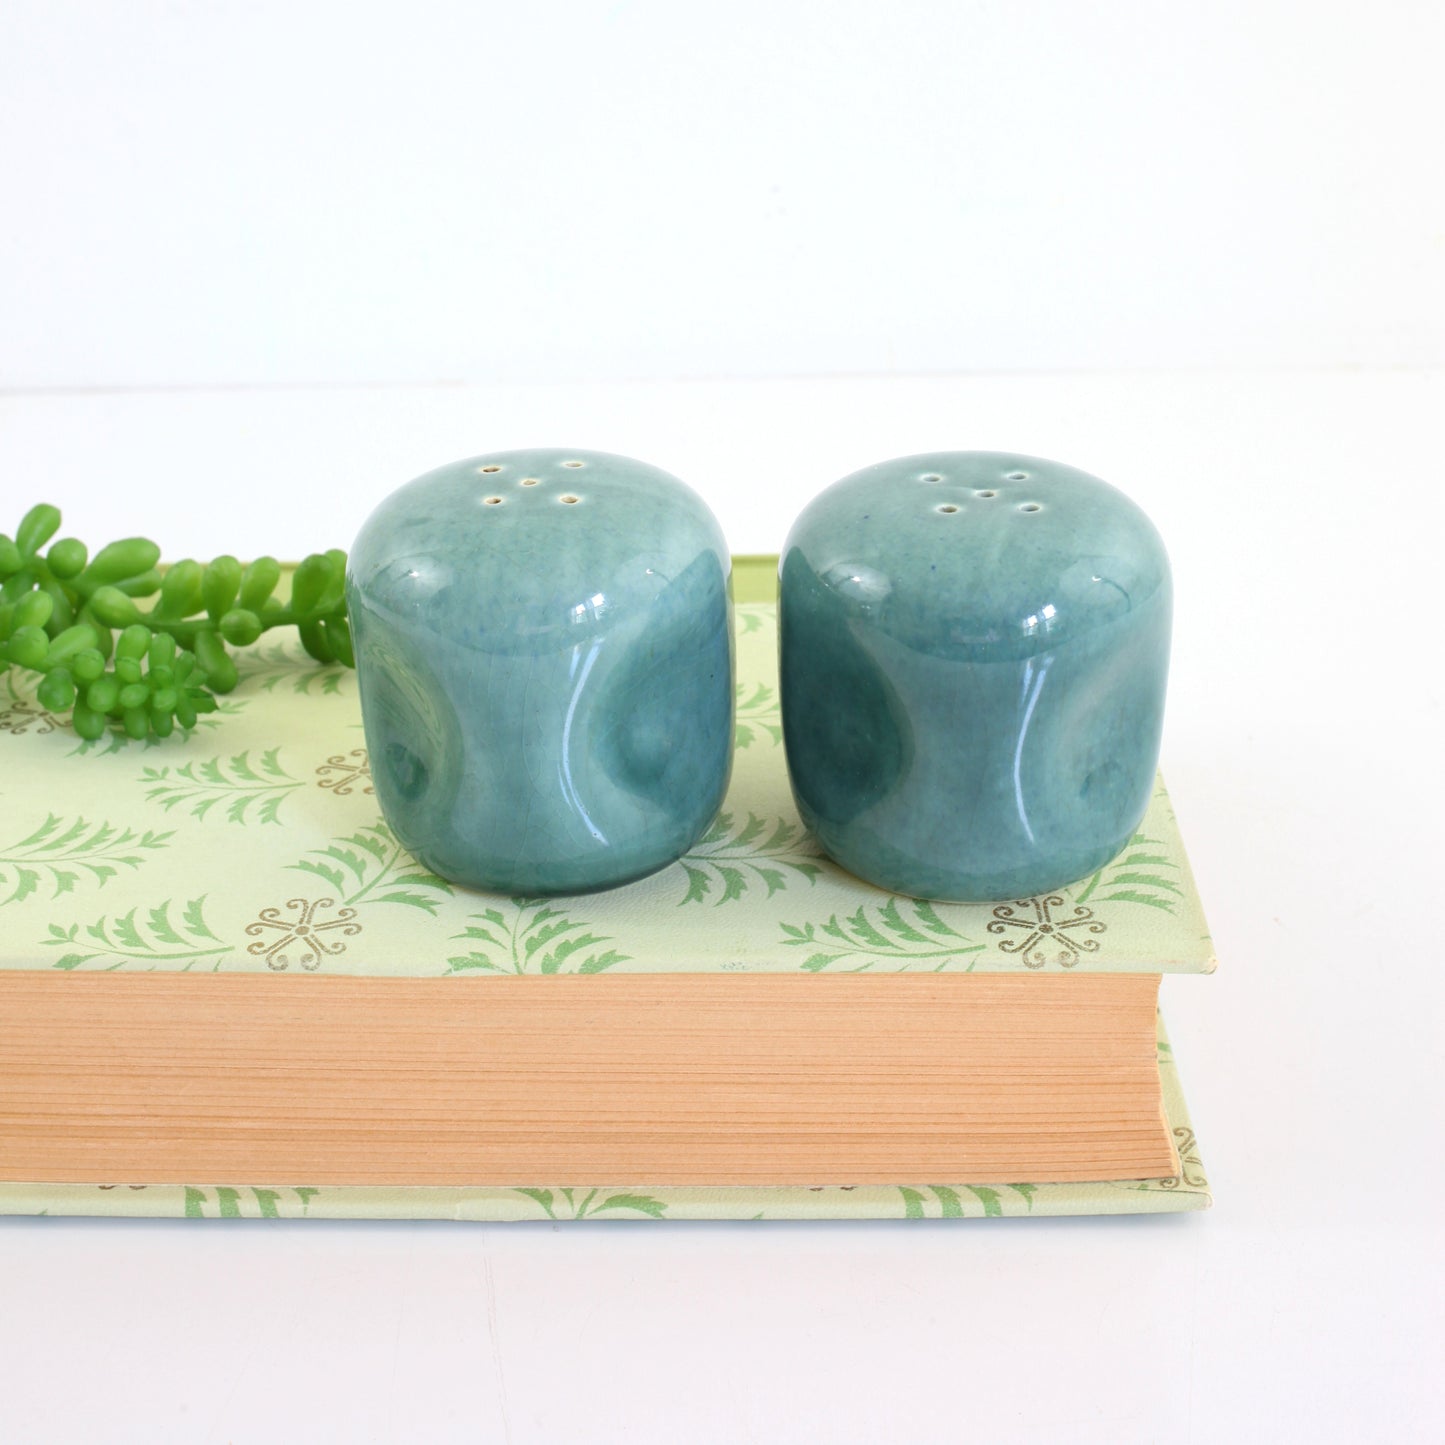 SOLD - Mid Century American Modern Seafoam Salt & Pepper Set by Russel Wright for Steubenville